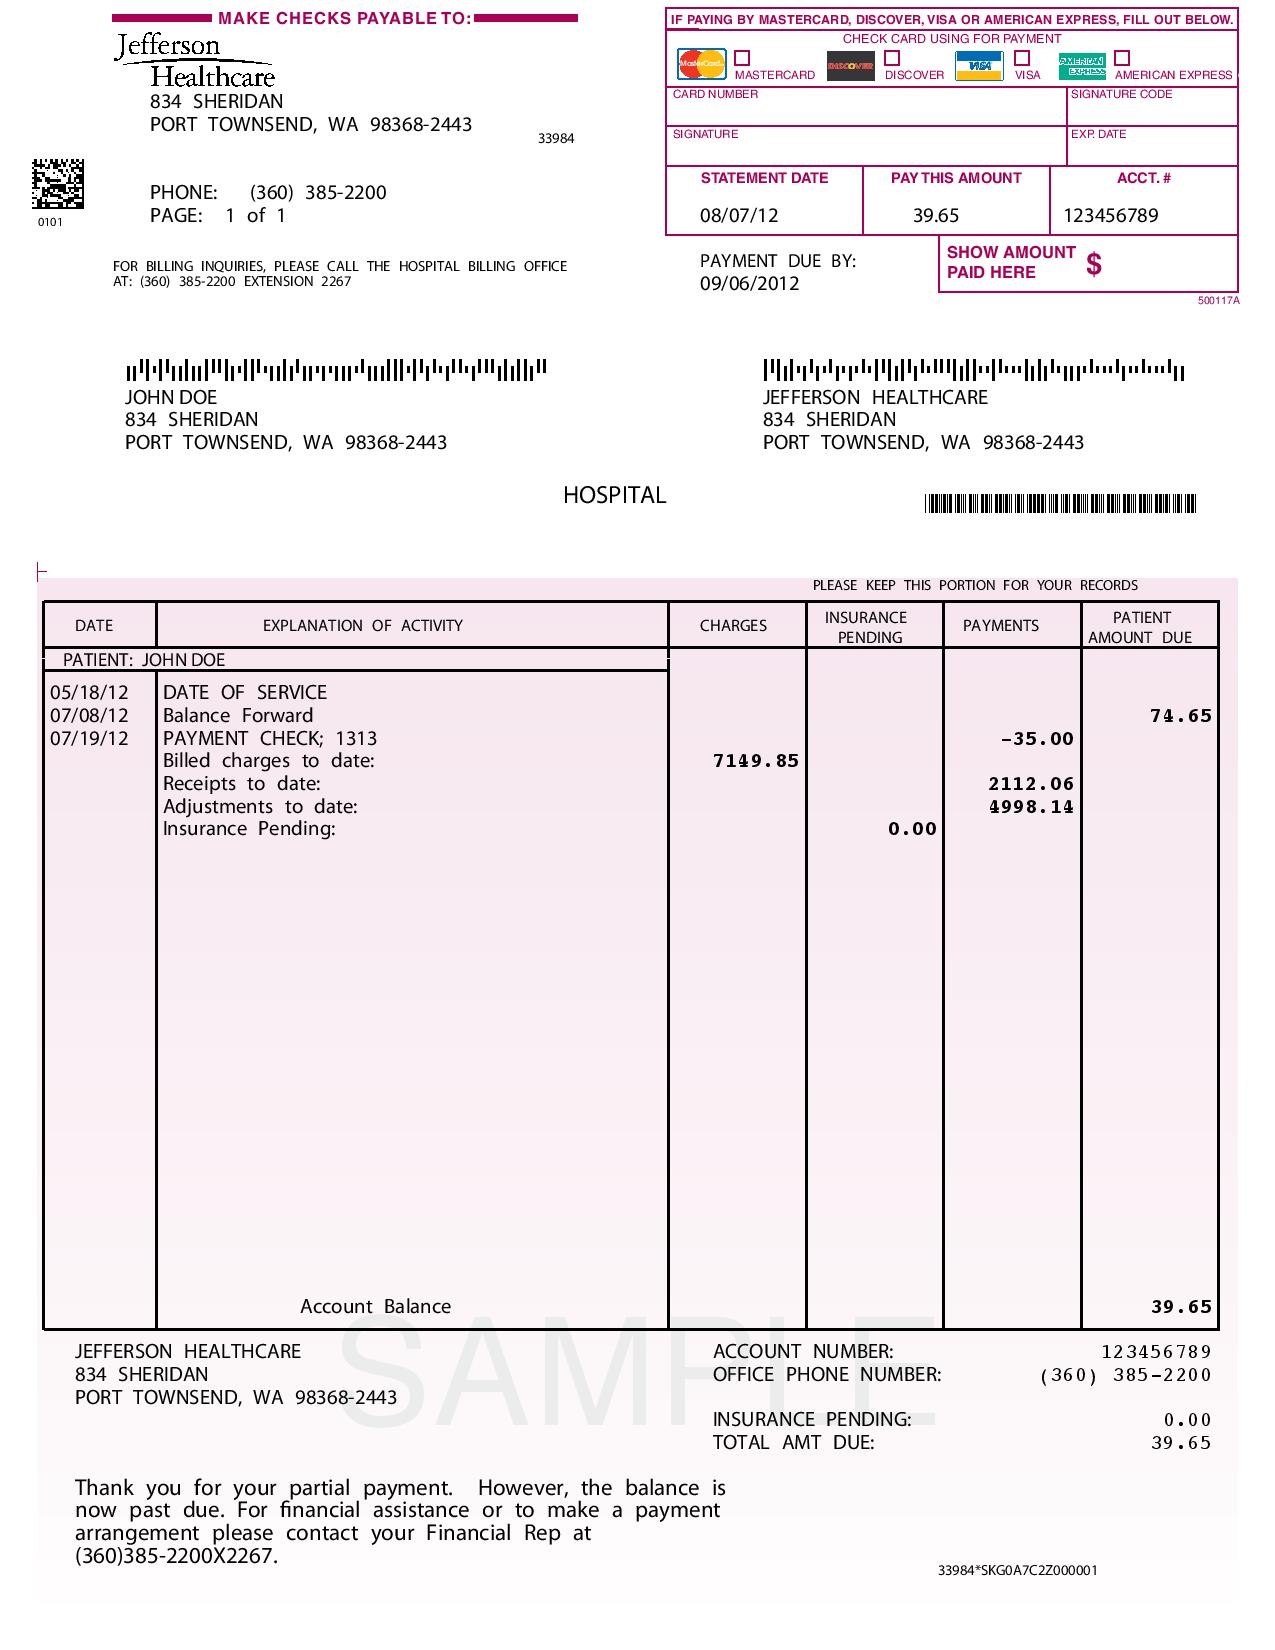 sample of invoice for payment submit a payment to jefferson healthcare hospital 1275 X 1650